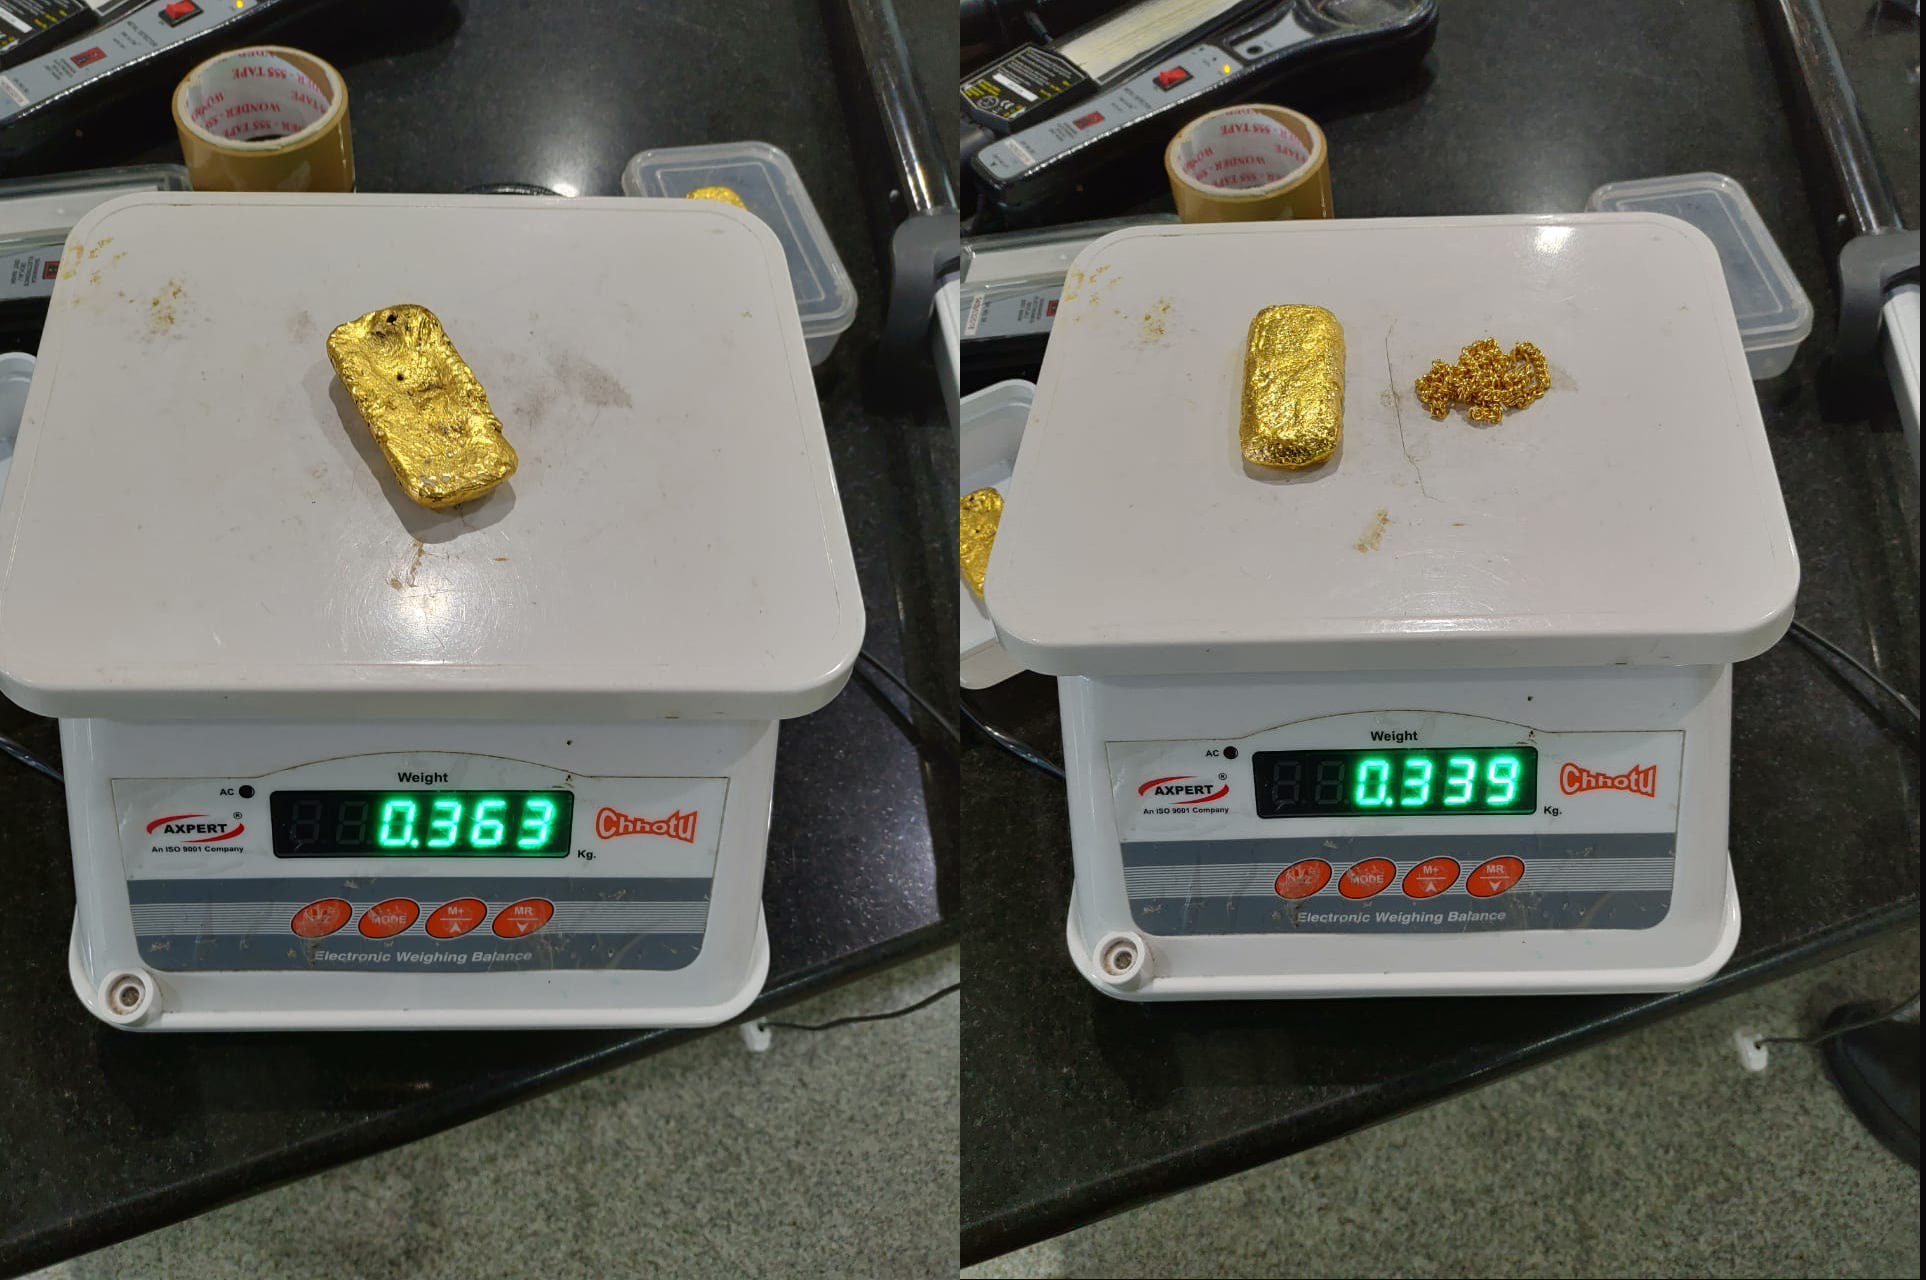 Two arrested at Mangaluru Airport while smuggling gold; seized gold worth over Rs.34 lakh